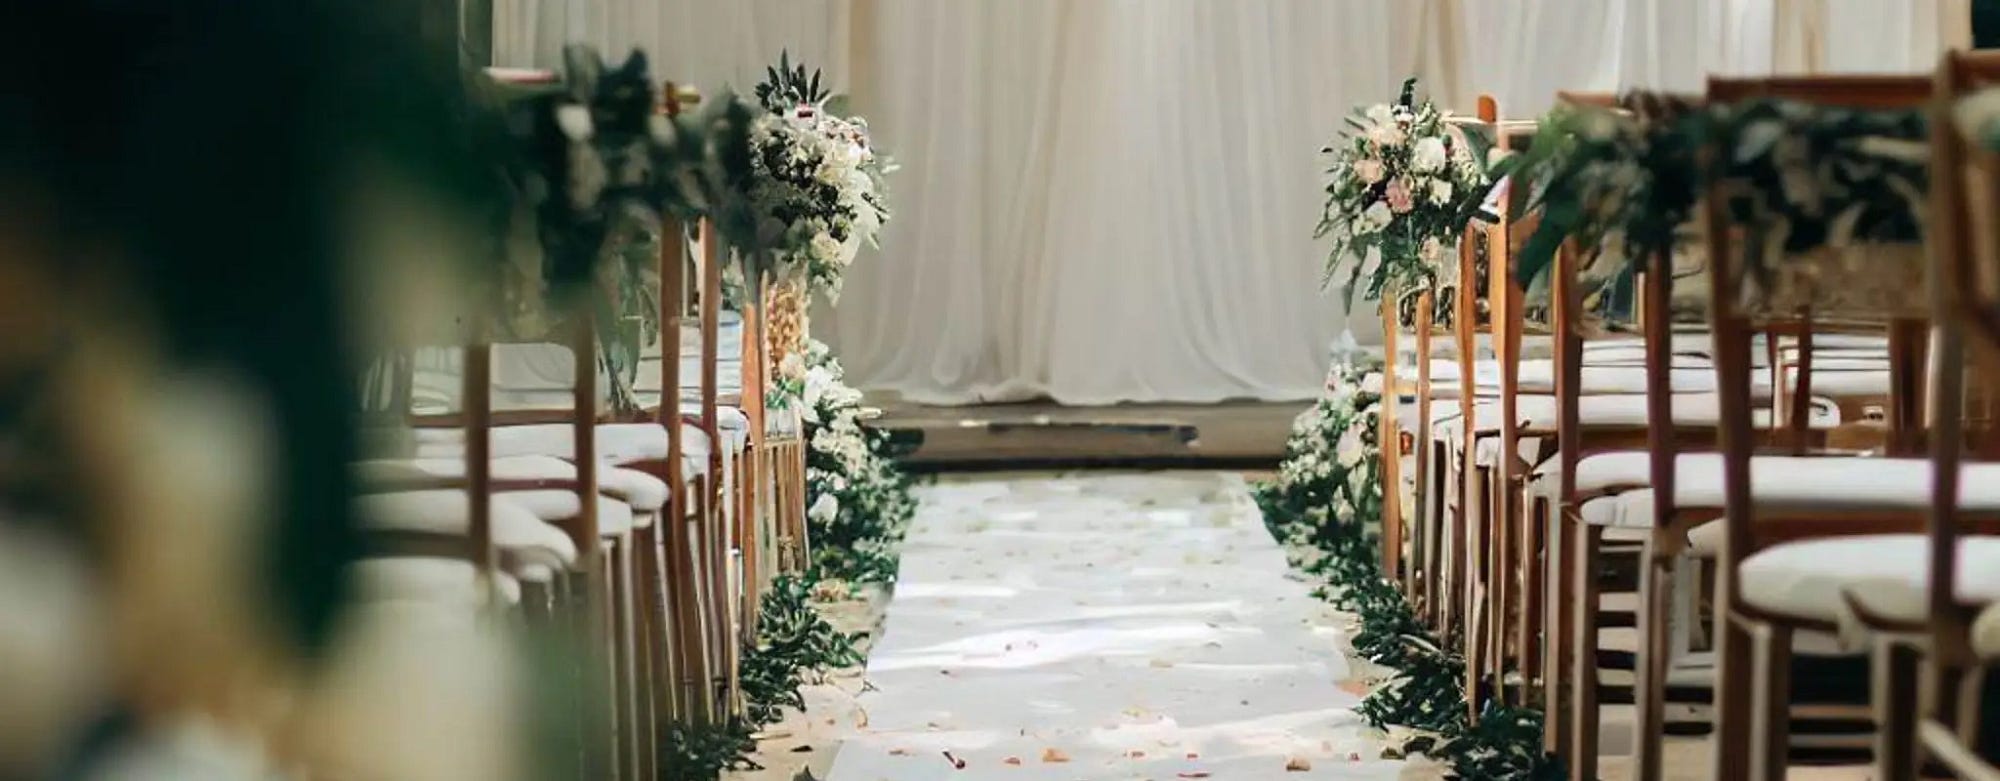 Customizable Carpet & Rugs for Ceremonies & Events